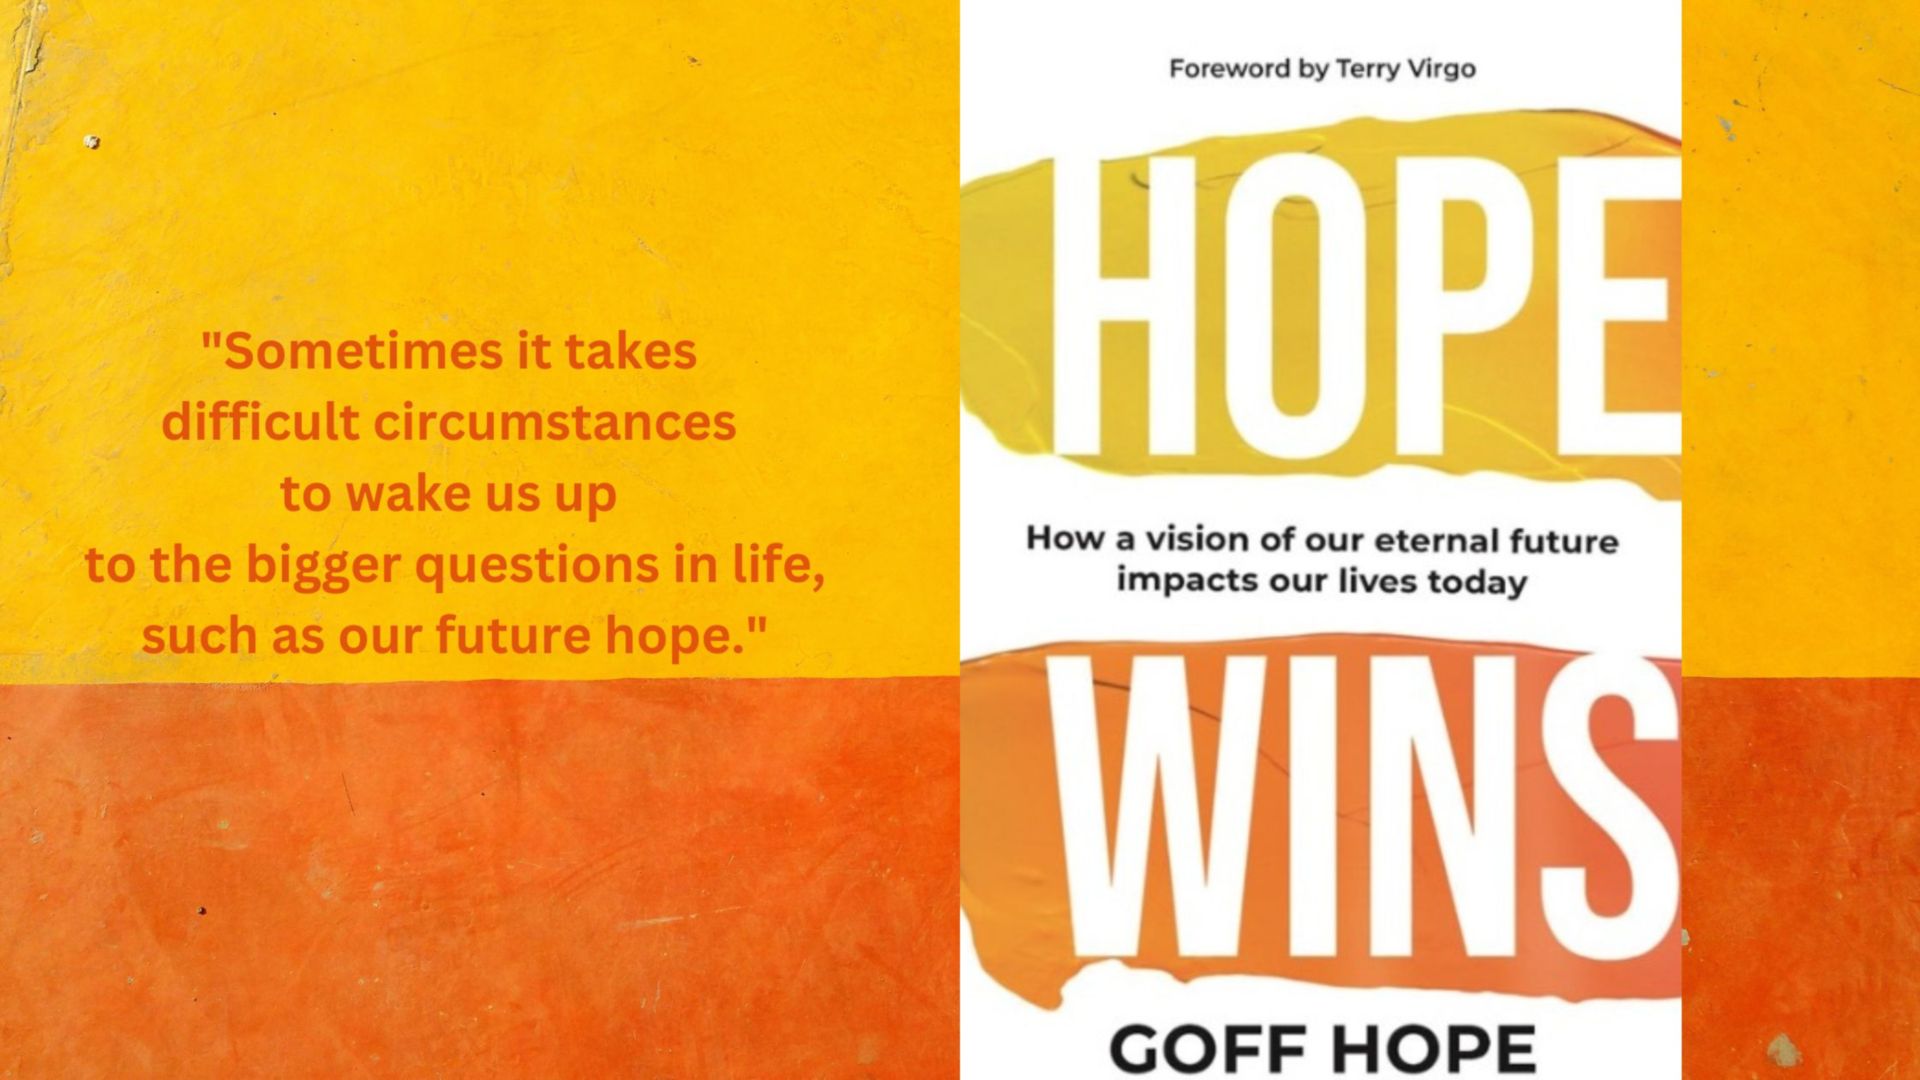 Interview with Goff Hope, author of 'Hope Wins'